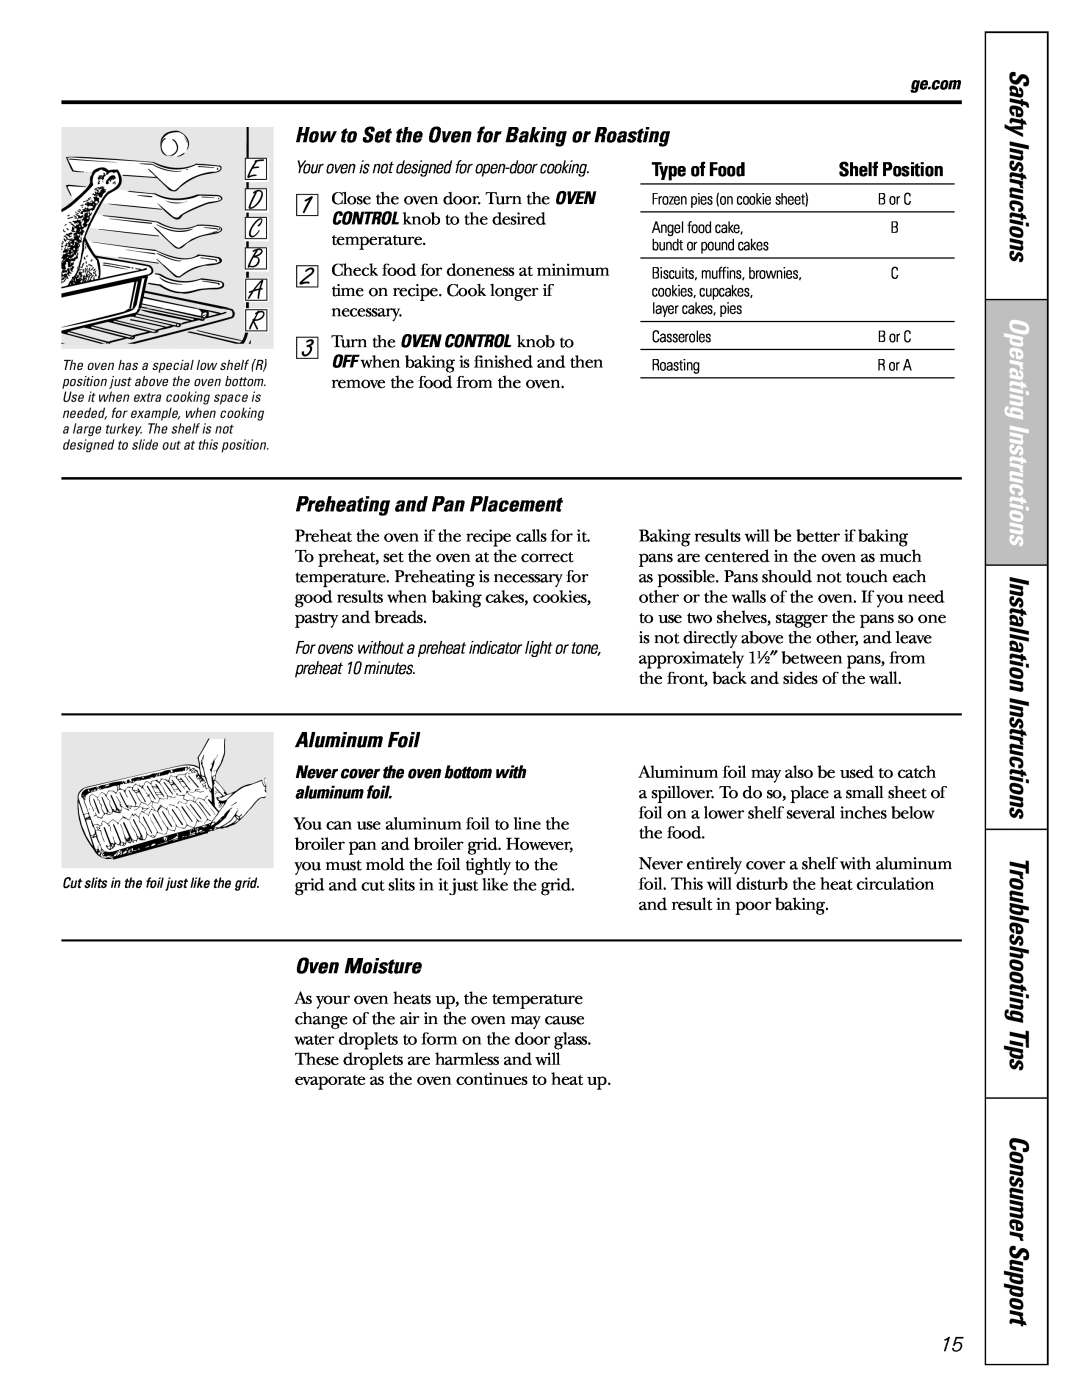 GE JGBS80 Safety, Installation, Tips Consumer Support, How to Set the Oven for Baking or Roasting, Aluminum Foil, ge.com 